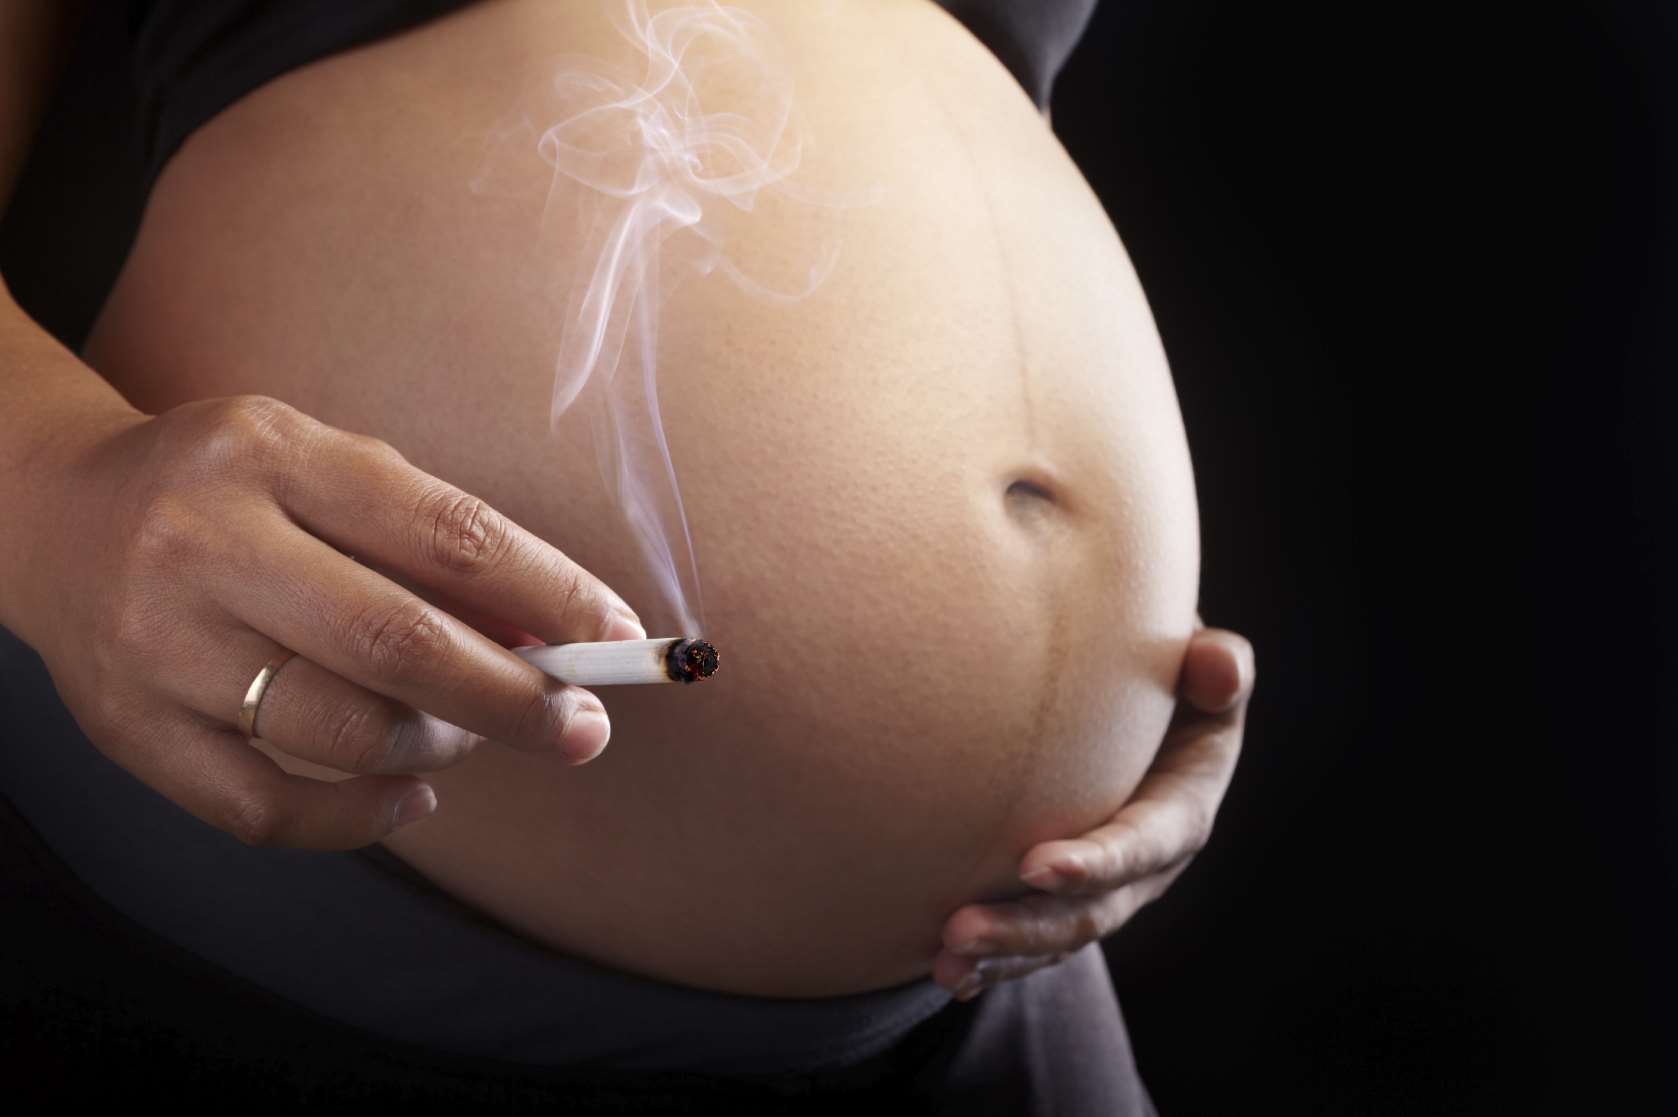 16.3% of pregnant women in Medway smoke